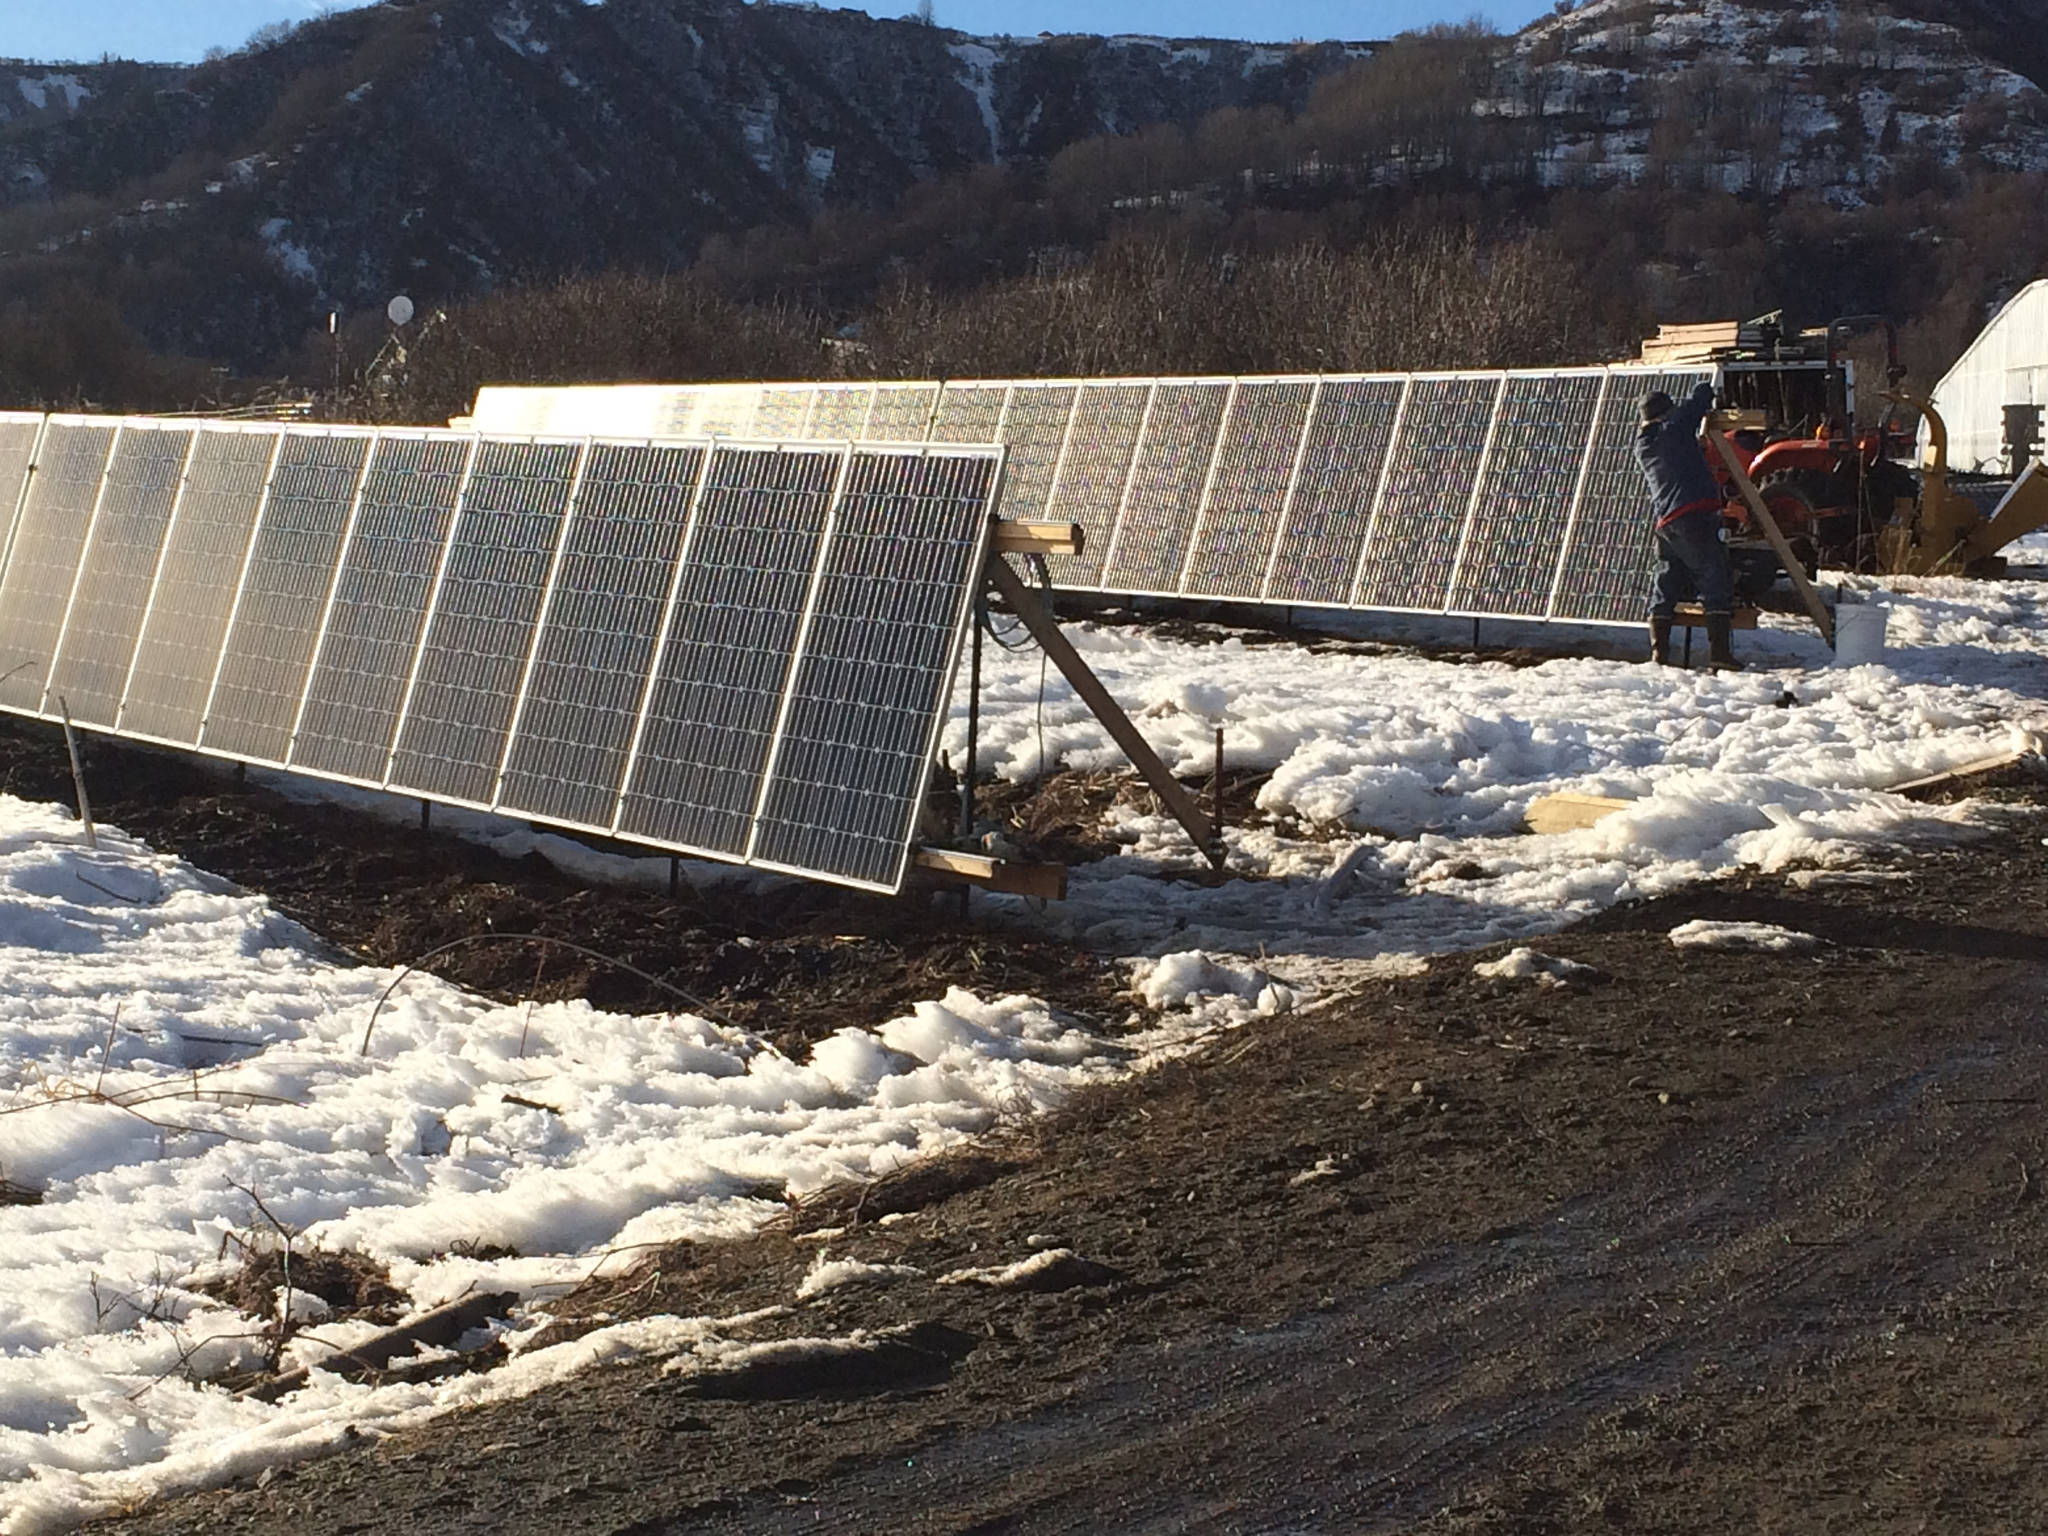 Oceanside Farms in Homer installed a 10,000-watt solar panel system to power its high tunnels and other facilities. (Photo provided)